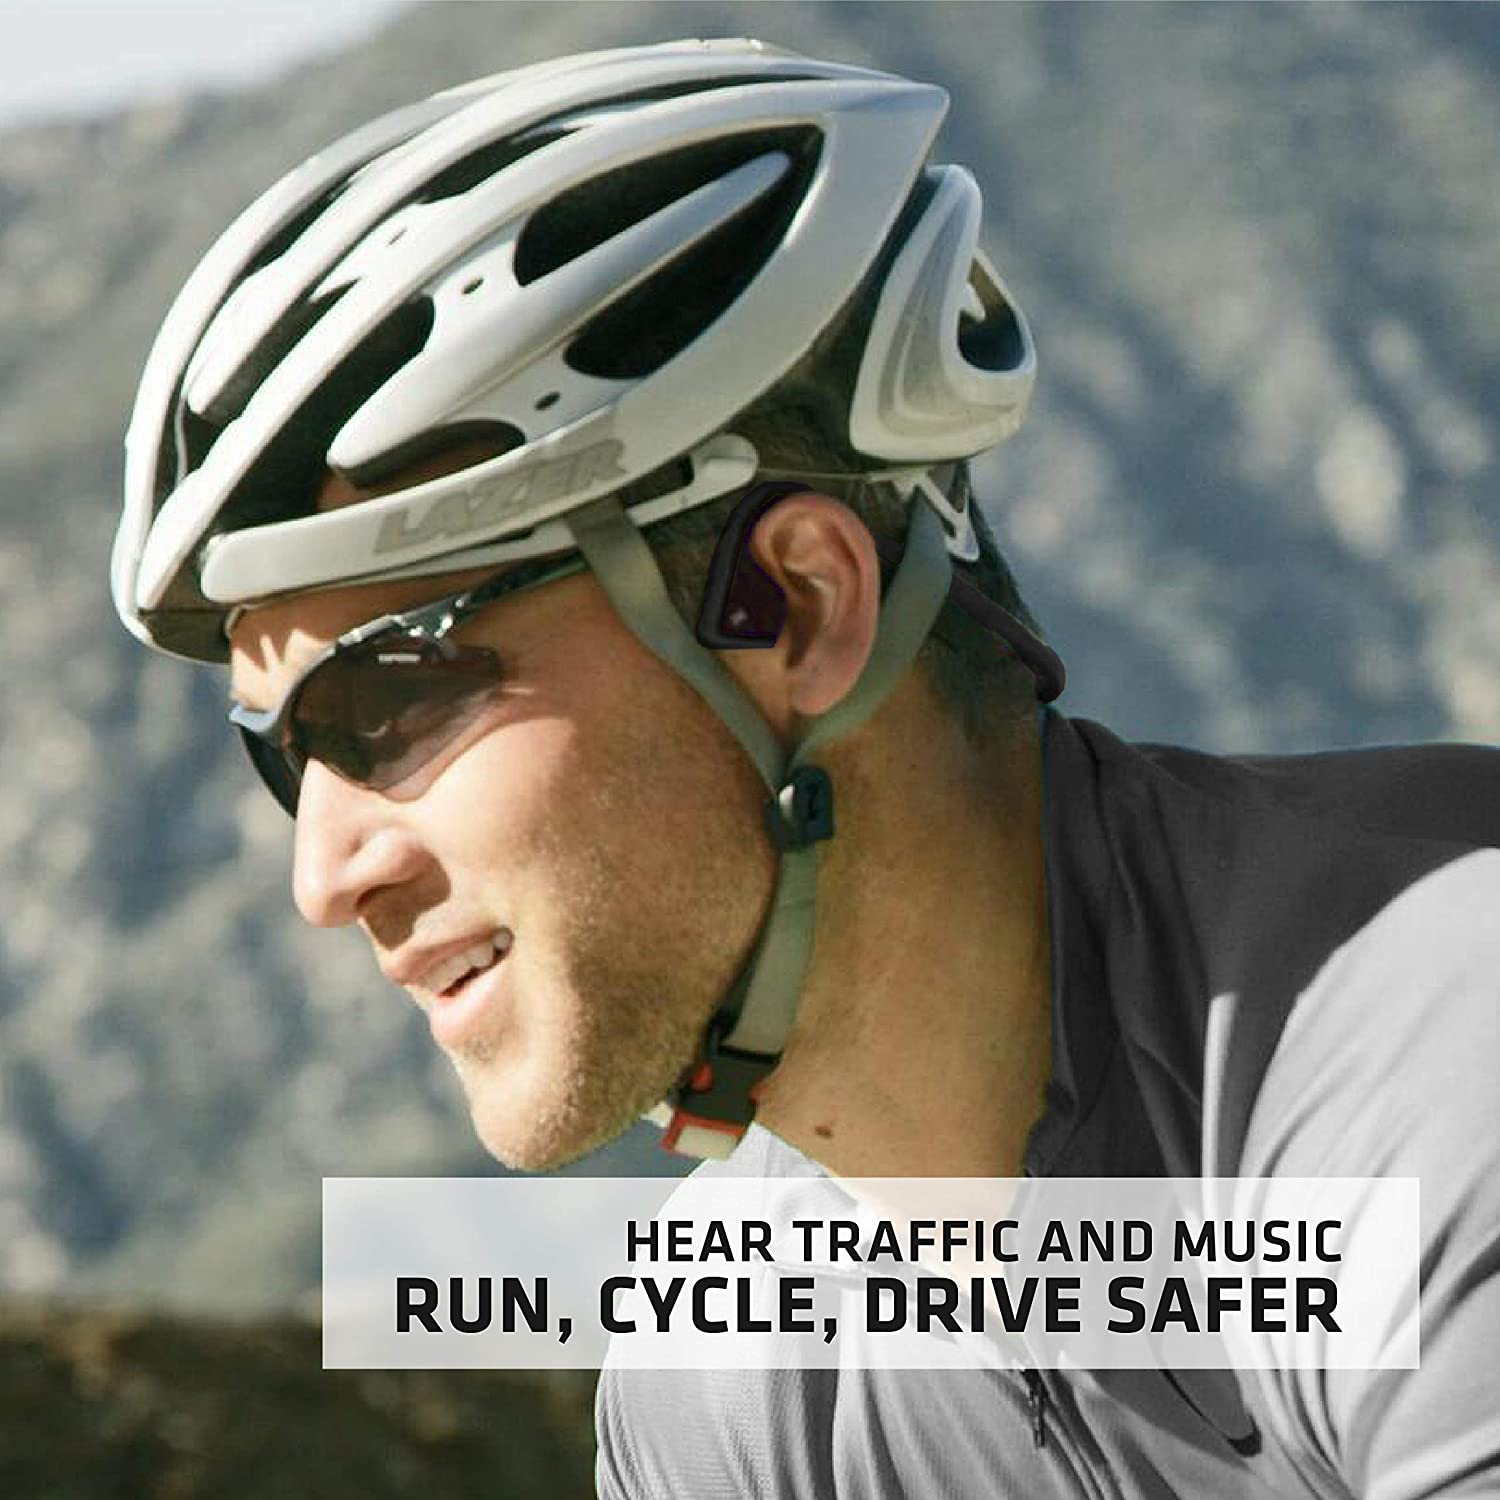 A cyclist safely navigating traffic while listening to FM radio using bone conduction headphones, remaining aware of surrounding sounds.